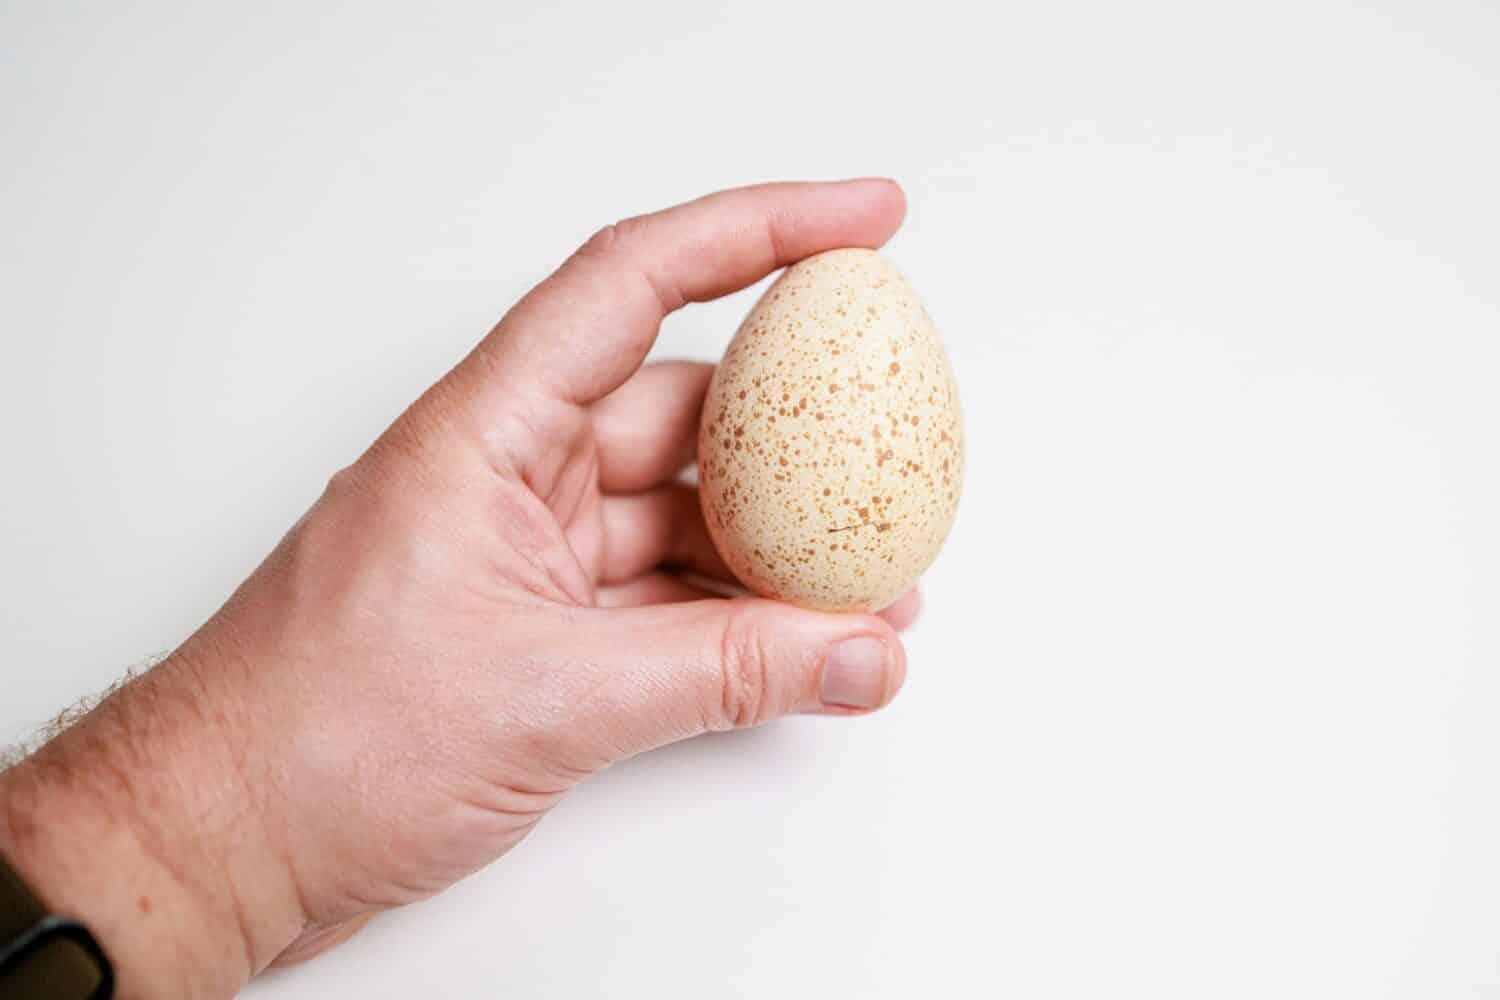 A person holding a Turkey Egg on their hand (no face) on a white background Large speckled egg (egg shells)